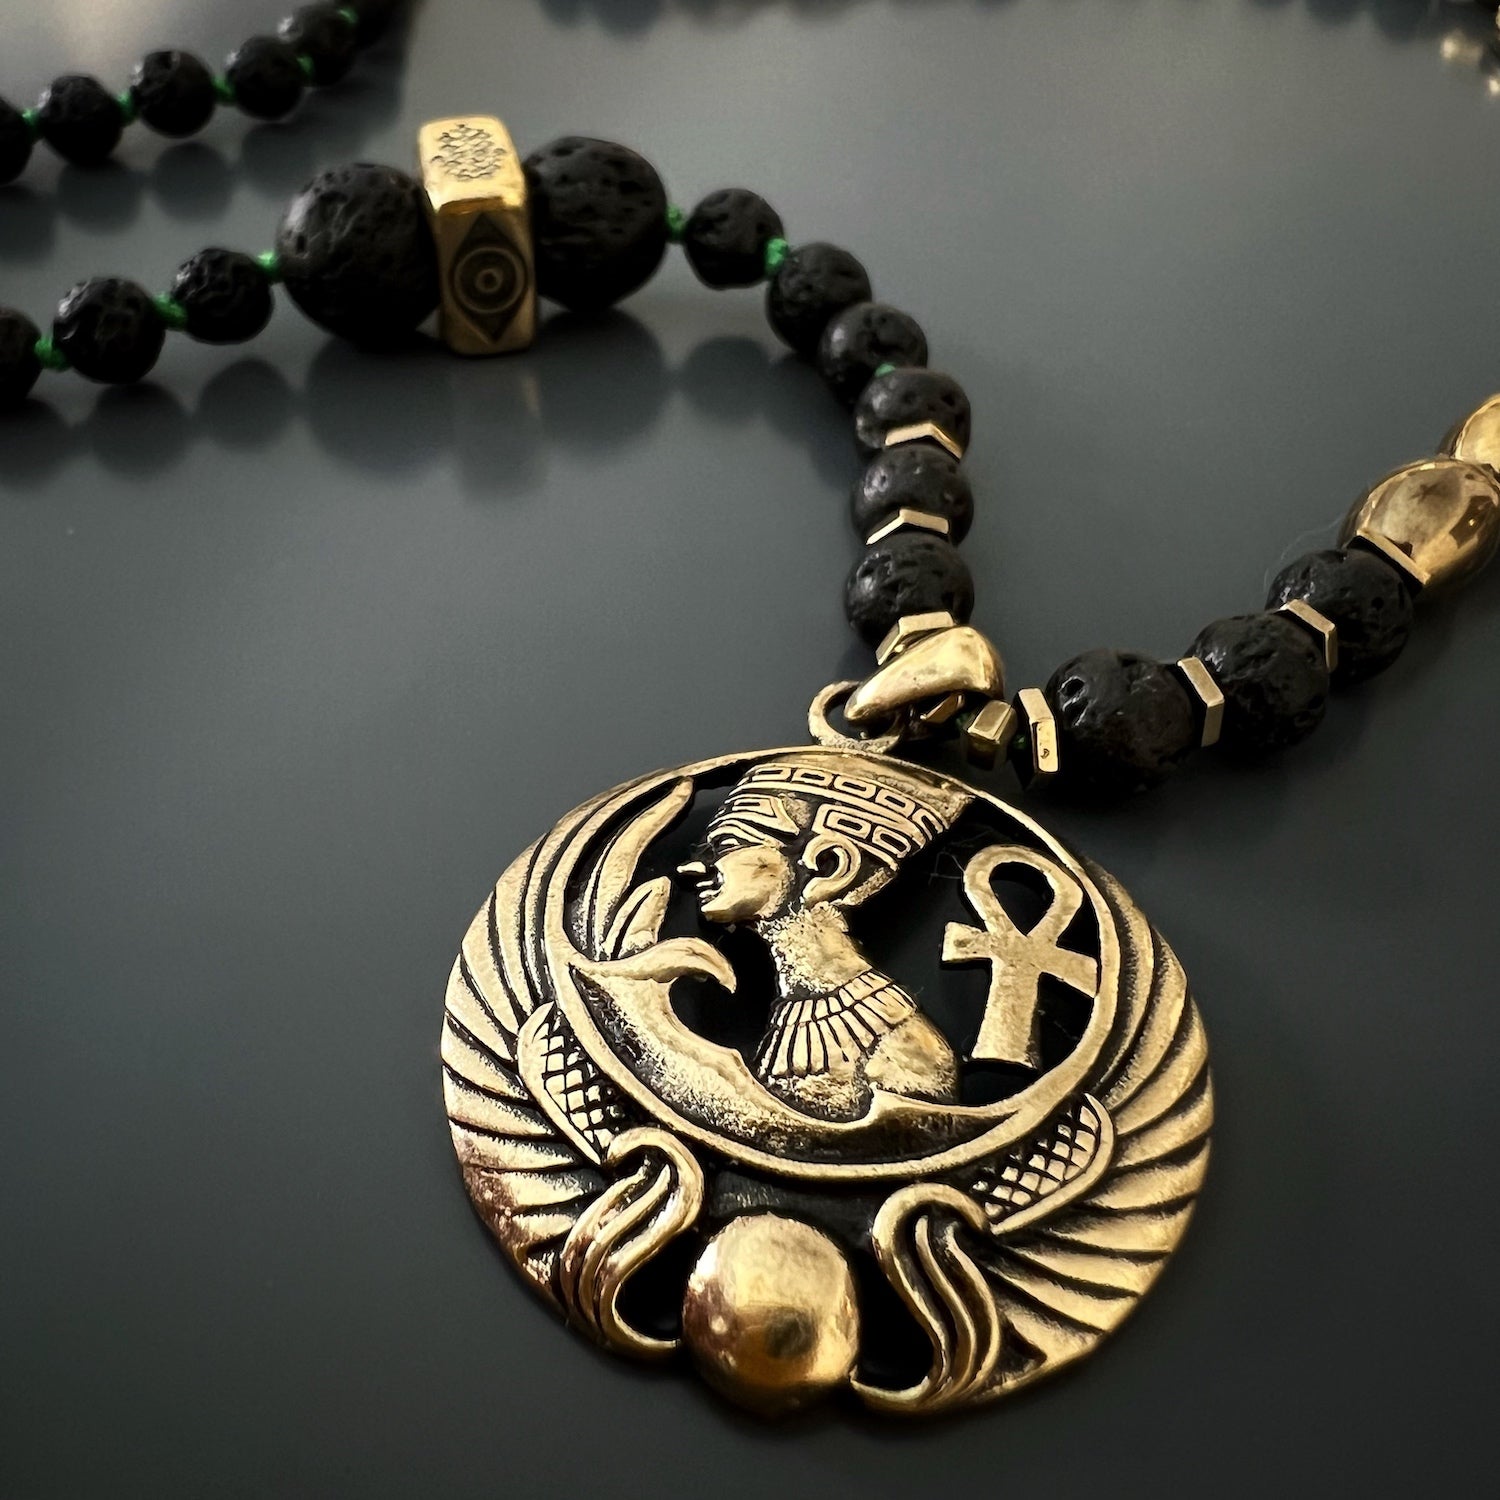 Handcrafted Black Lava Rock Stone Necklace with Regal Bronze Queen Pendant